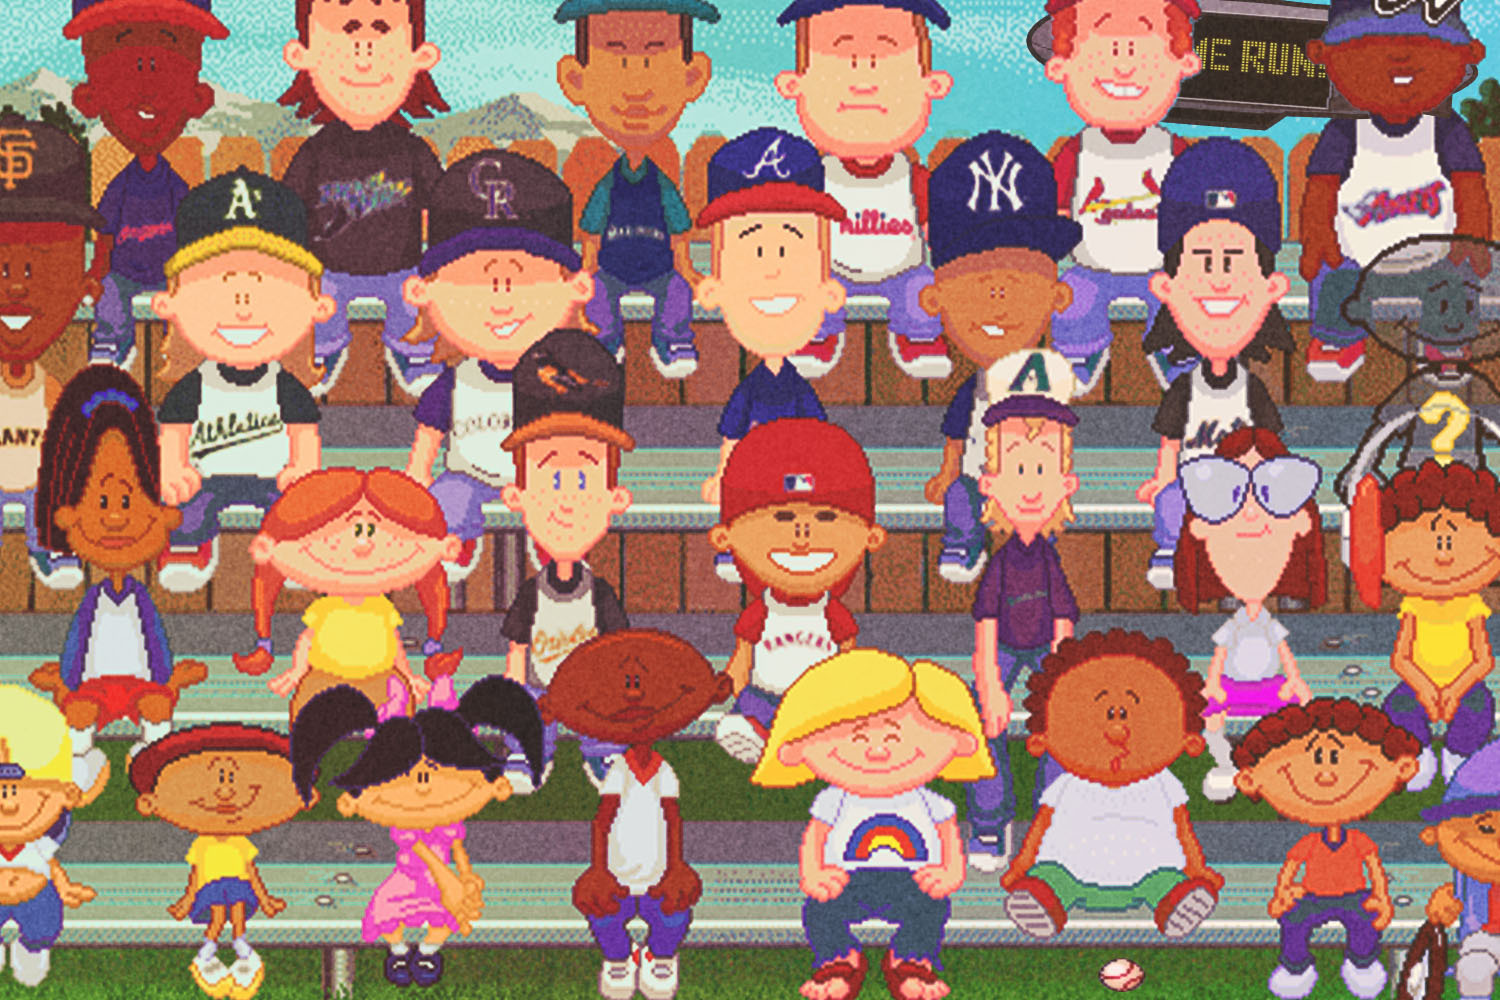 kompression Vi ses Udvalg Why "Backyard Baseball" Was the Most Inclusive Video Game Ever - InsideHook